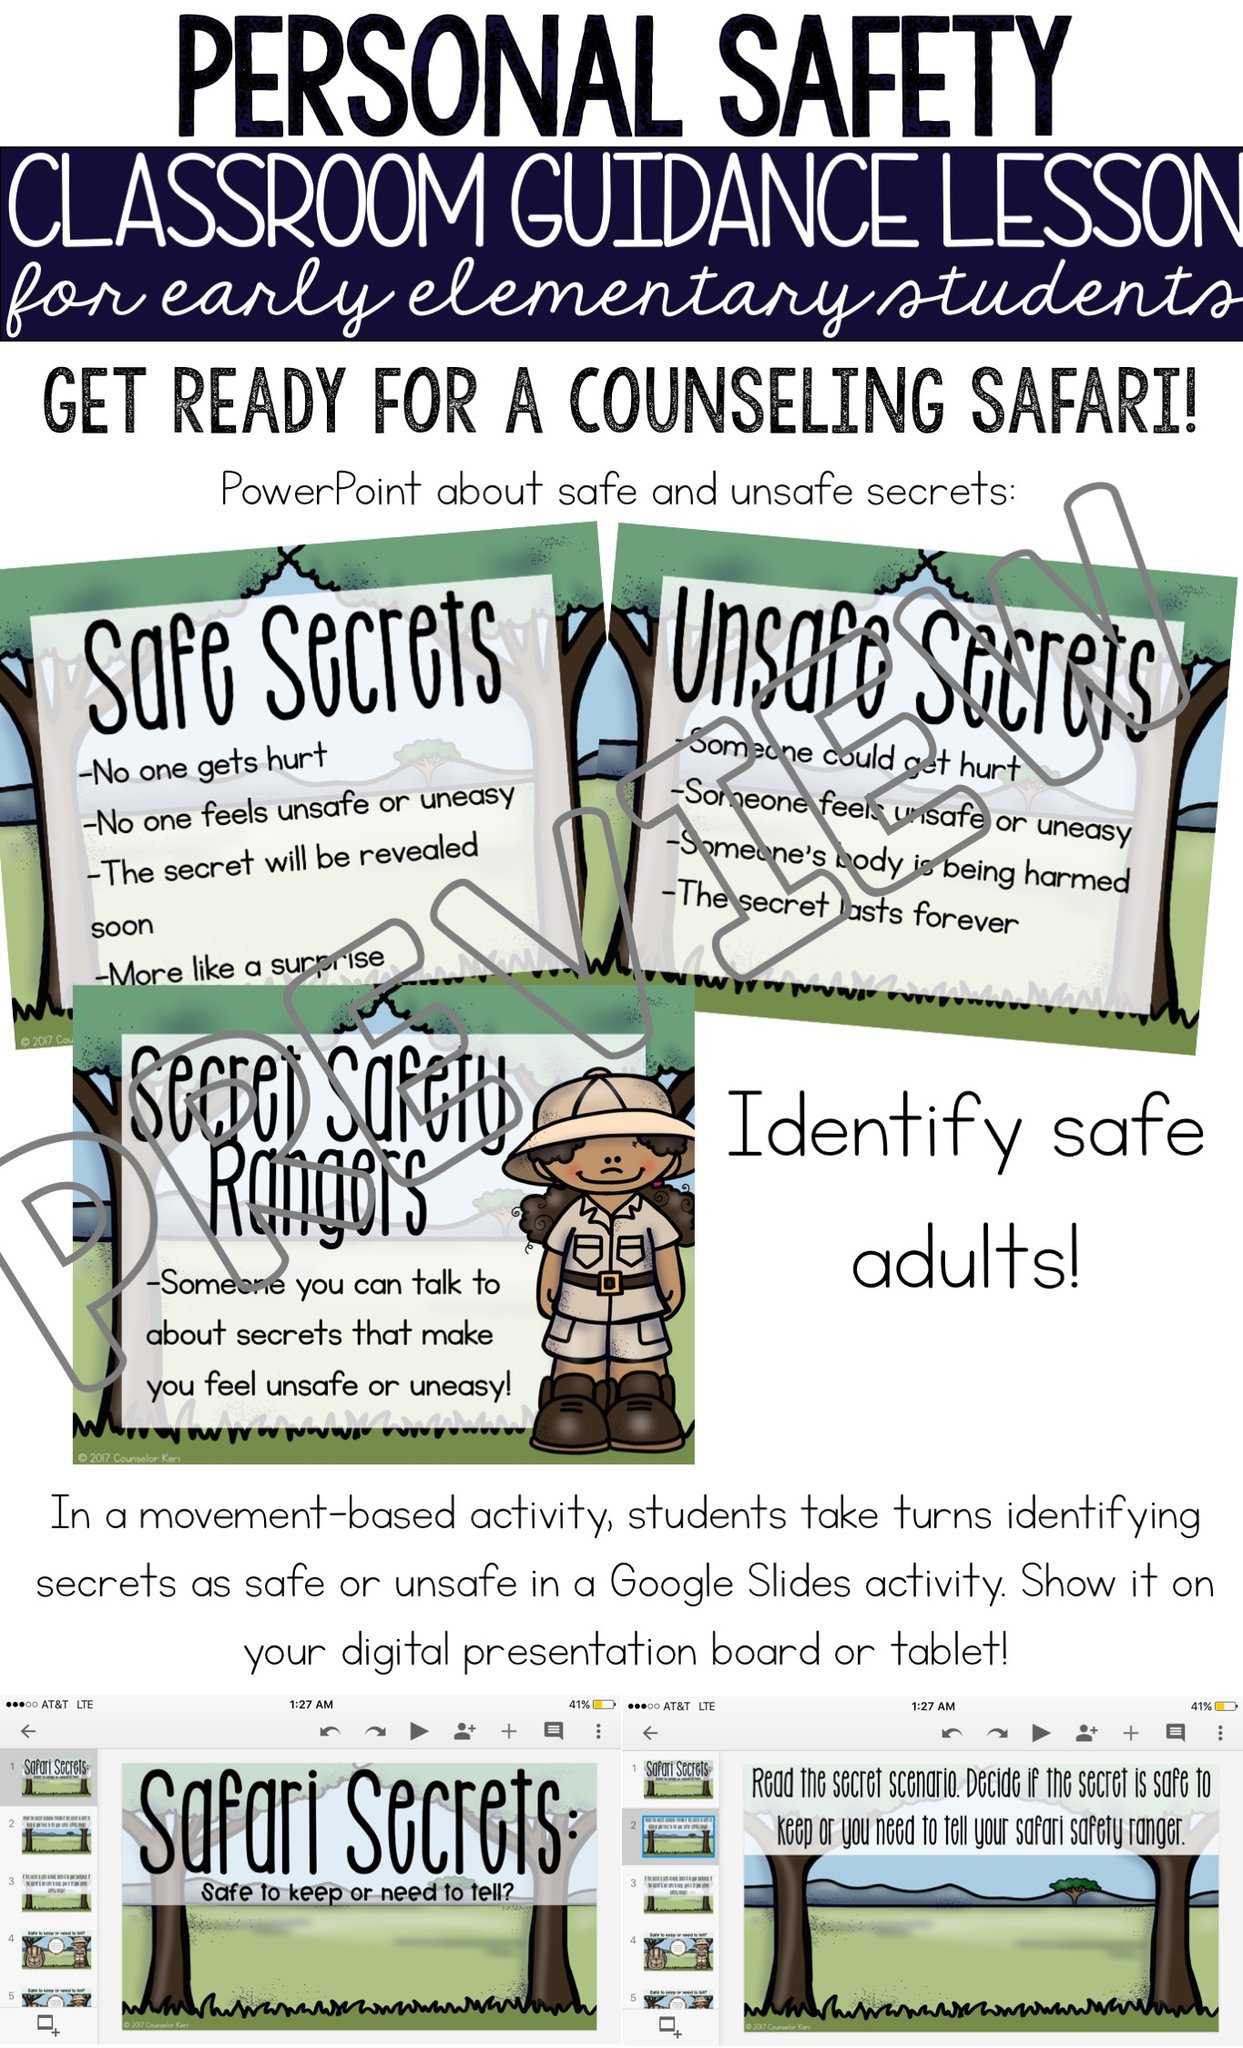 Internet Safety Worksheets for Elementary Students as Well as Personal Safety Classroom Guidance Lesson for Elementary School